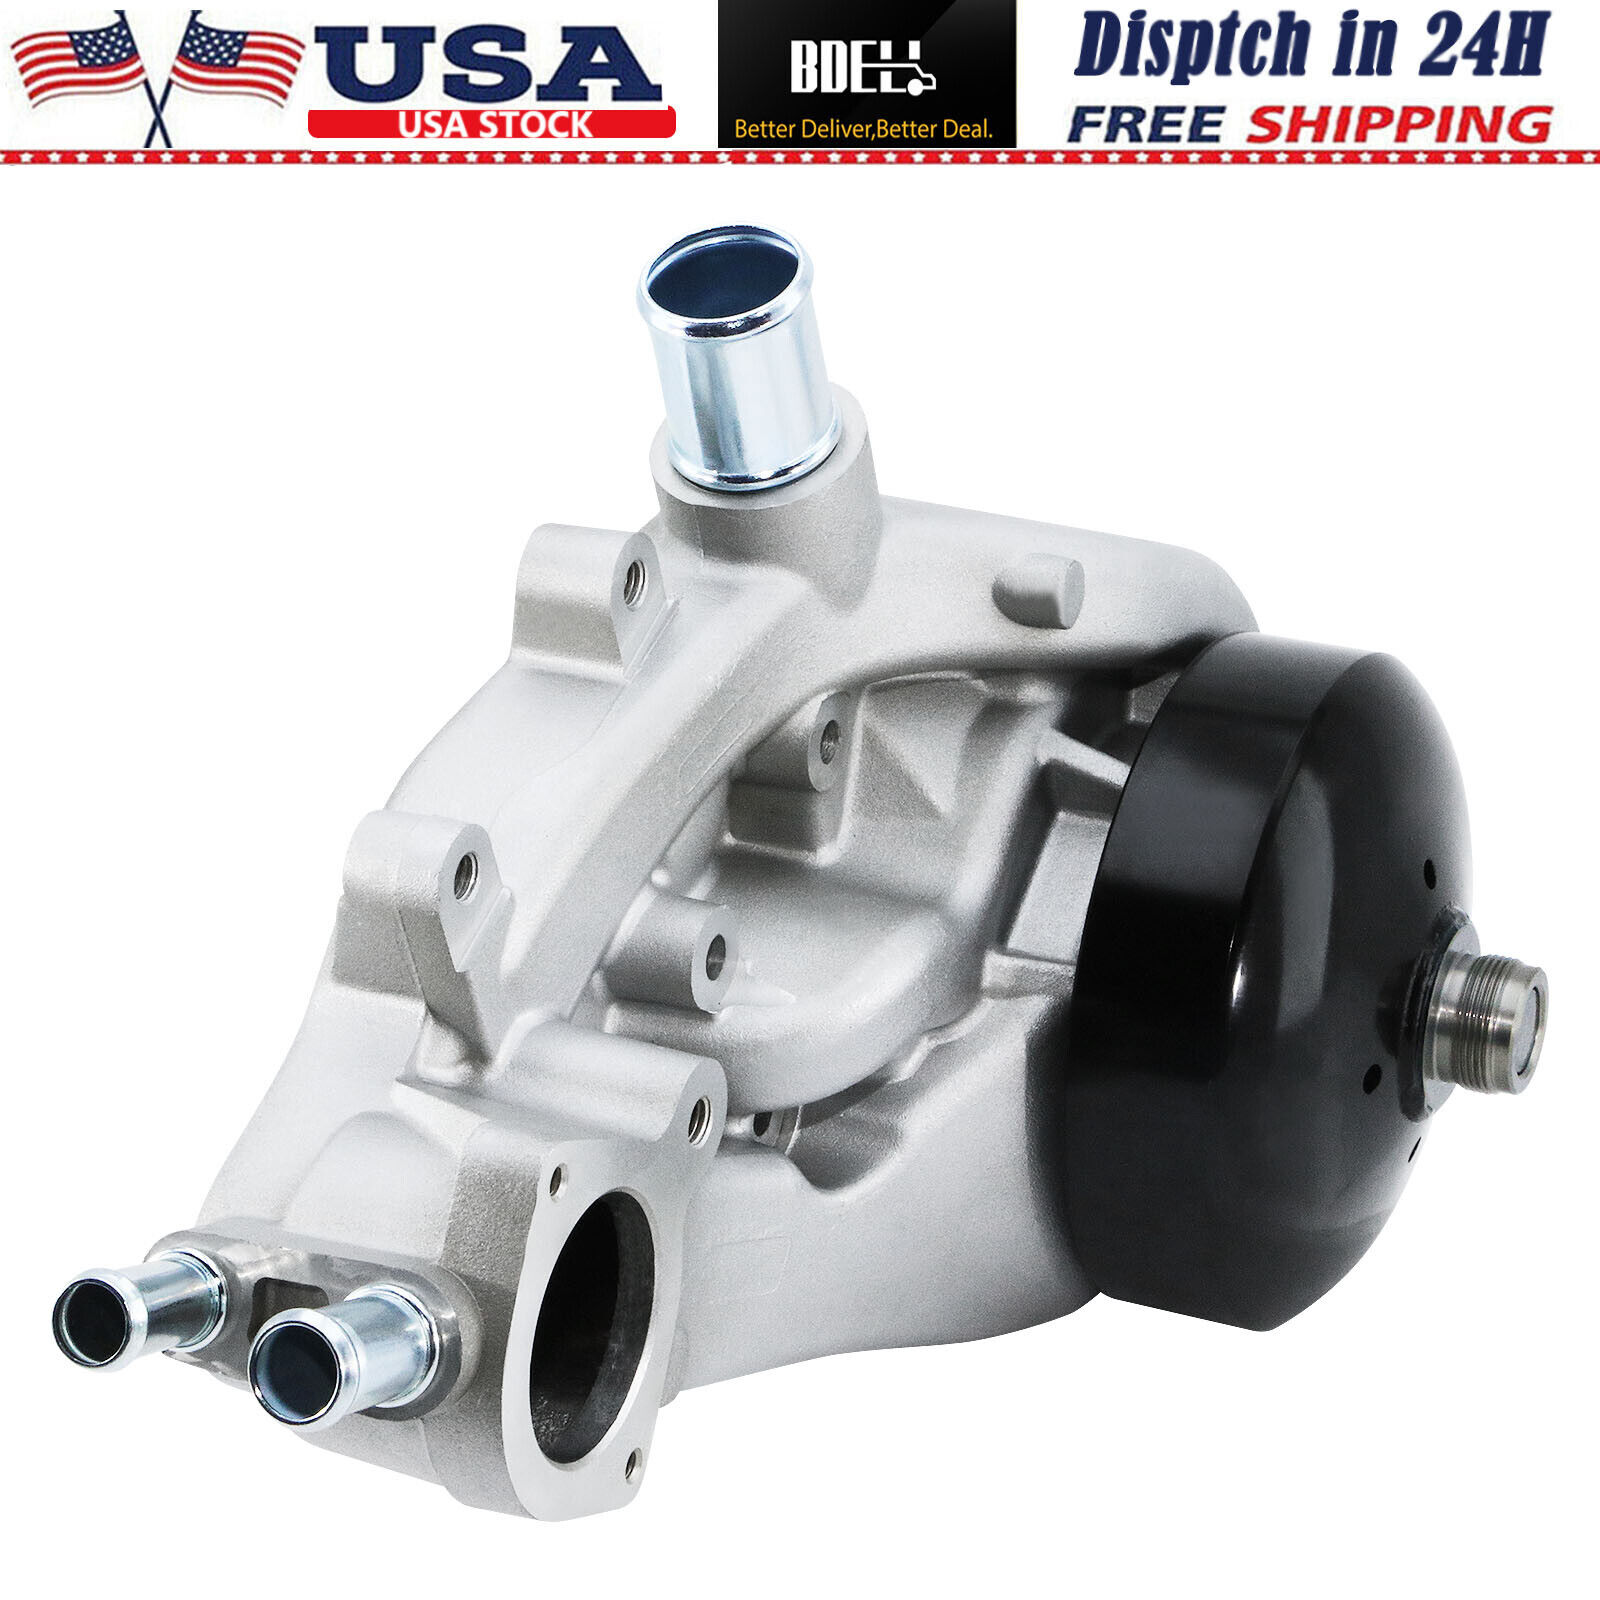 Water Pump For 07-09 Chevrolet GMC Hummer Saab Buick 4.8L 5.3L 6.0L OHV AW6009